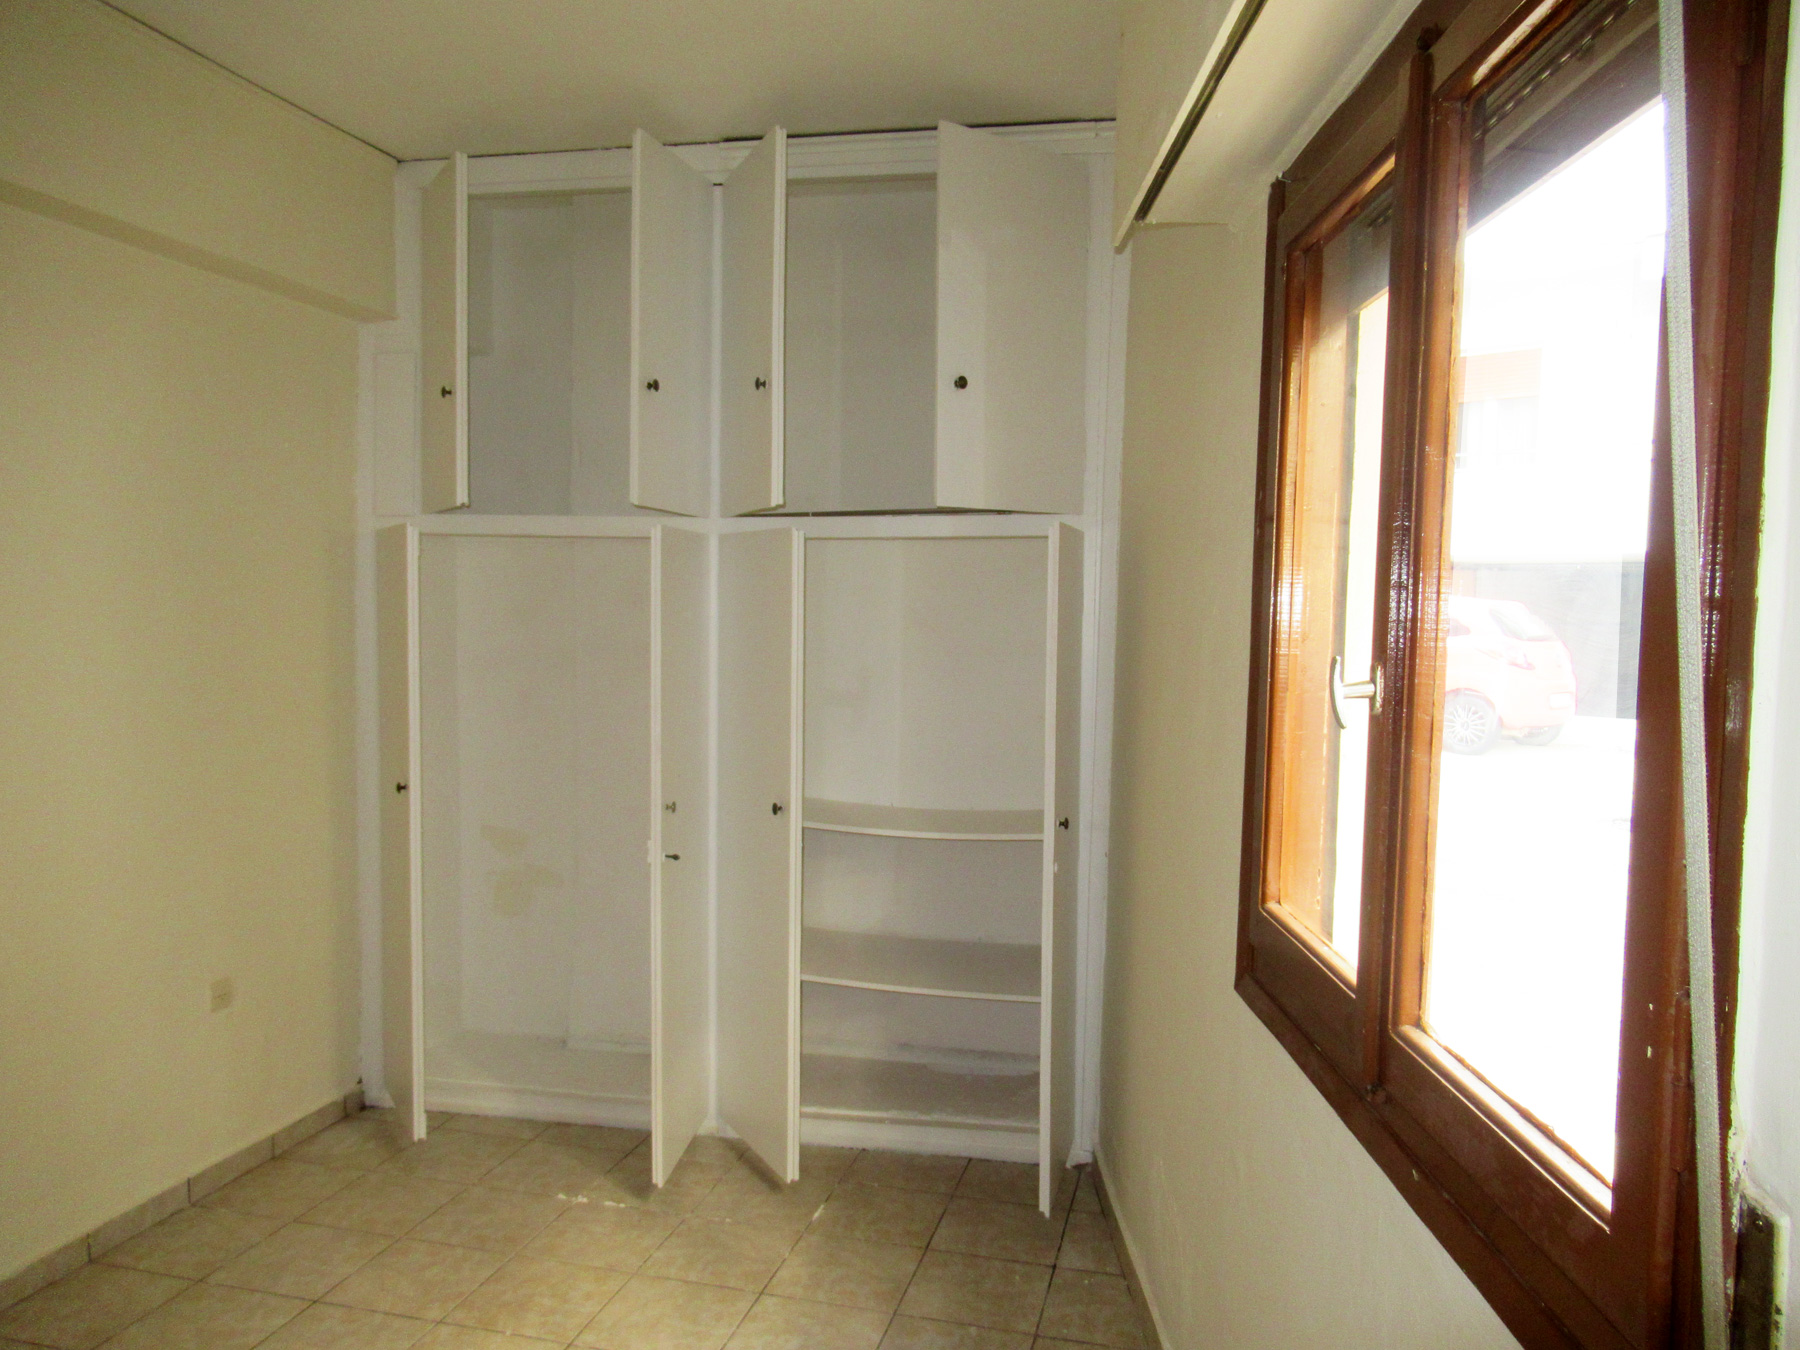 For rent, a comfortable 1 bedroom apartment of 45 sq.m. on the ground floor at the center in Ioannina.